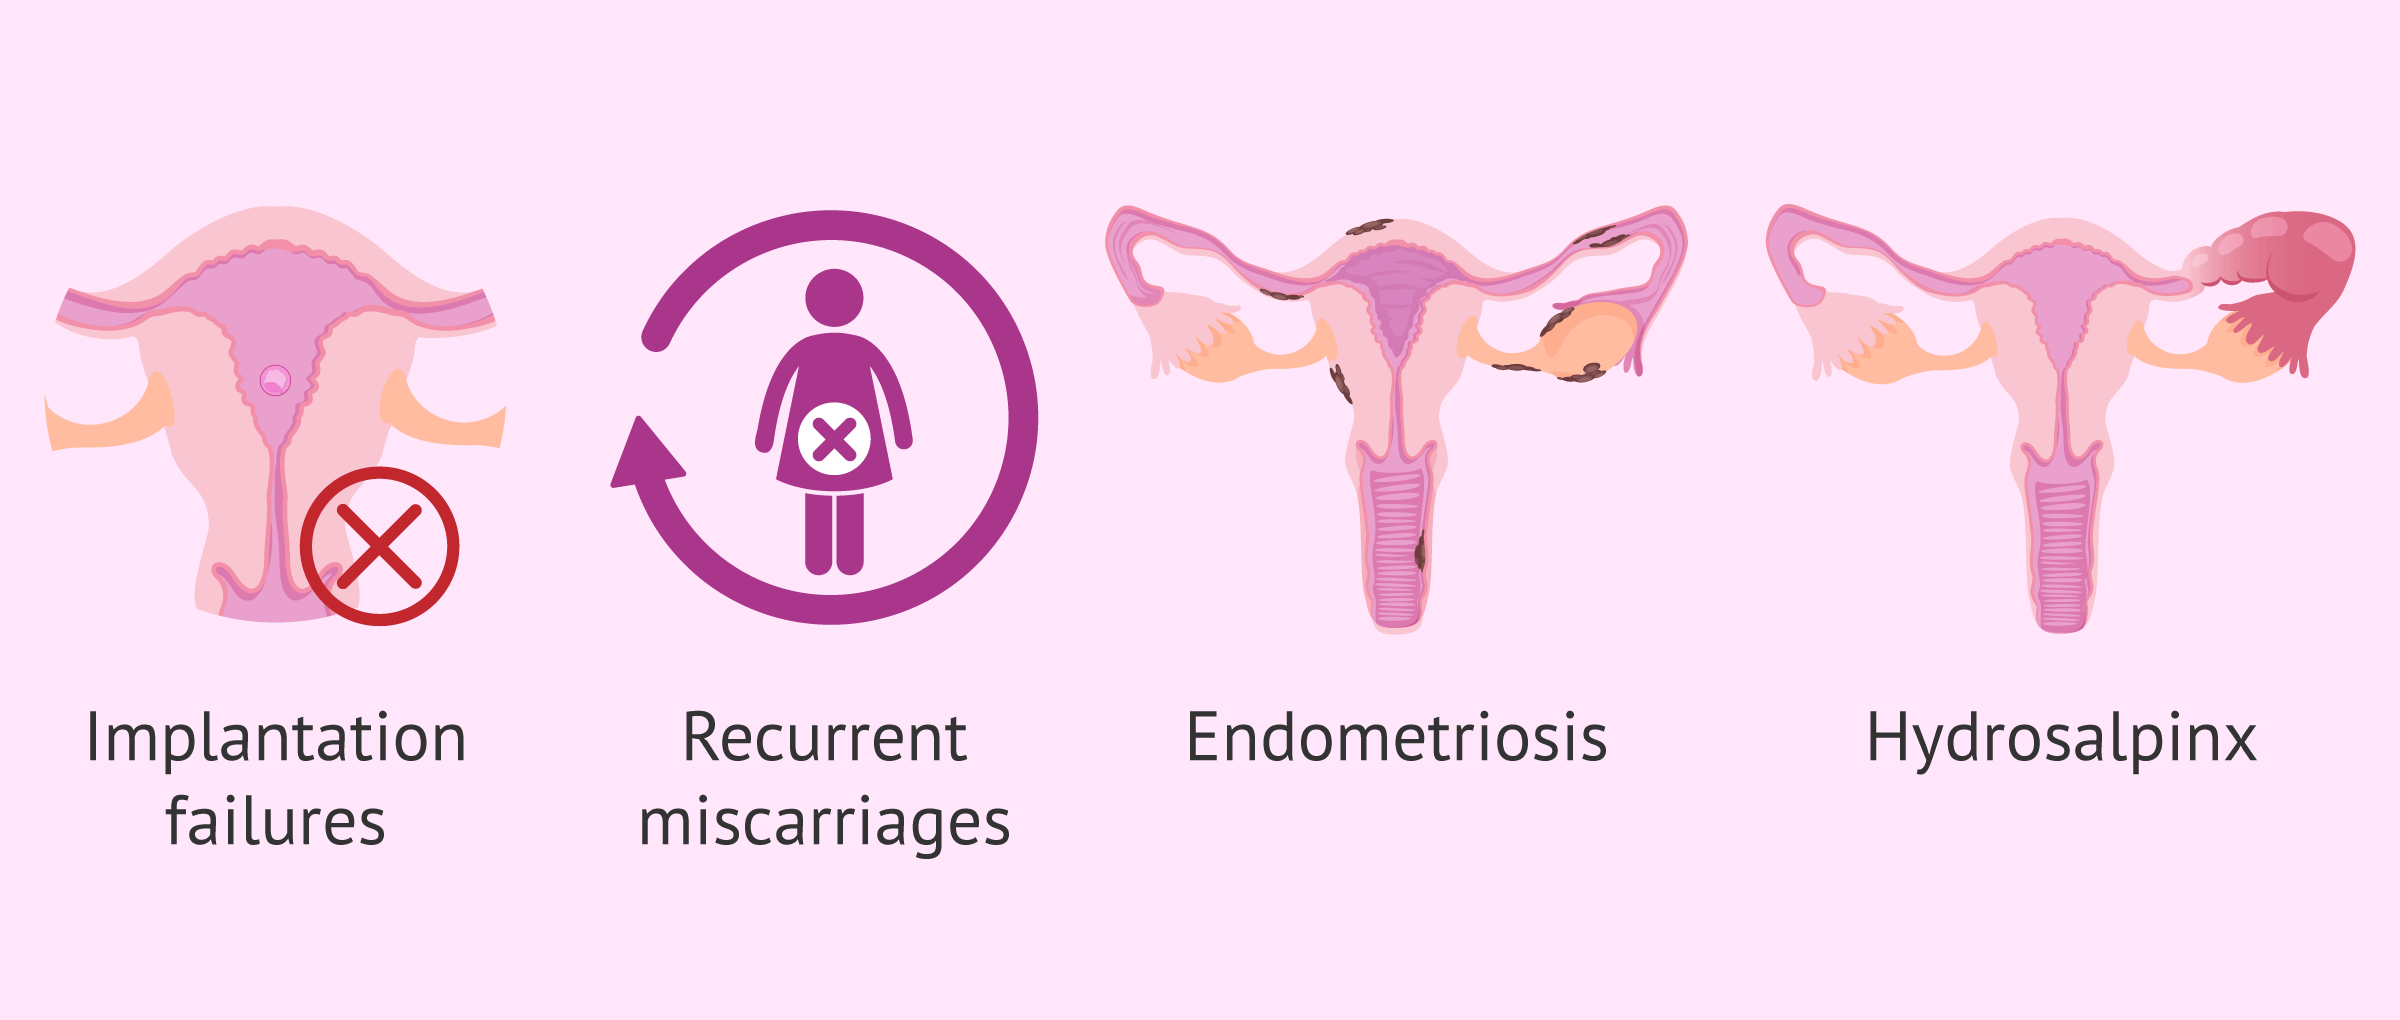 When is the endomeTRIO test recommended?